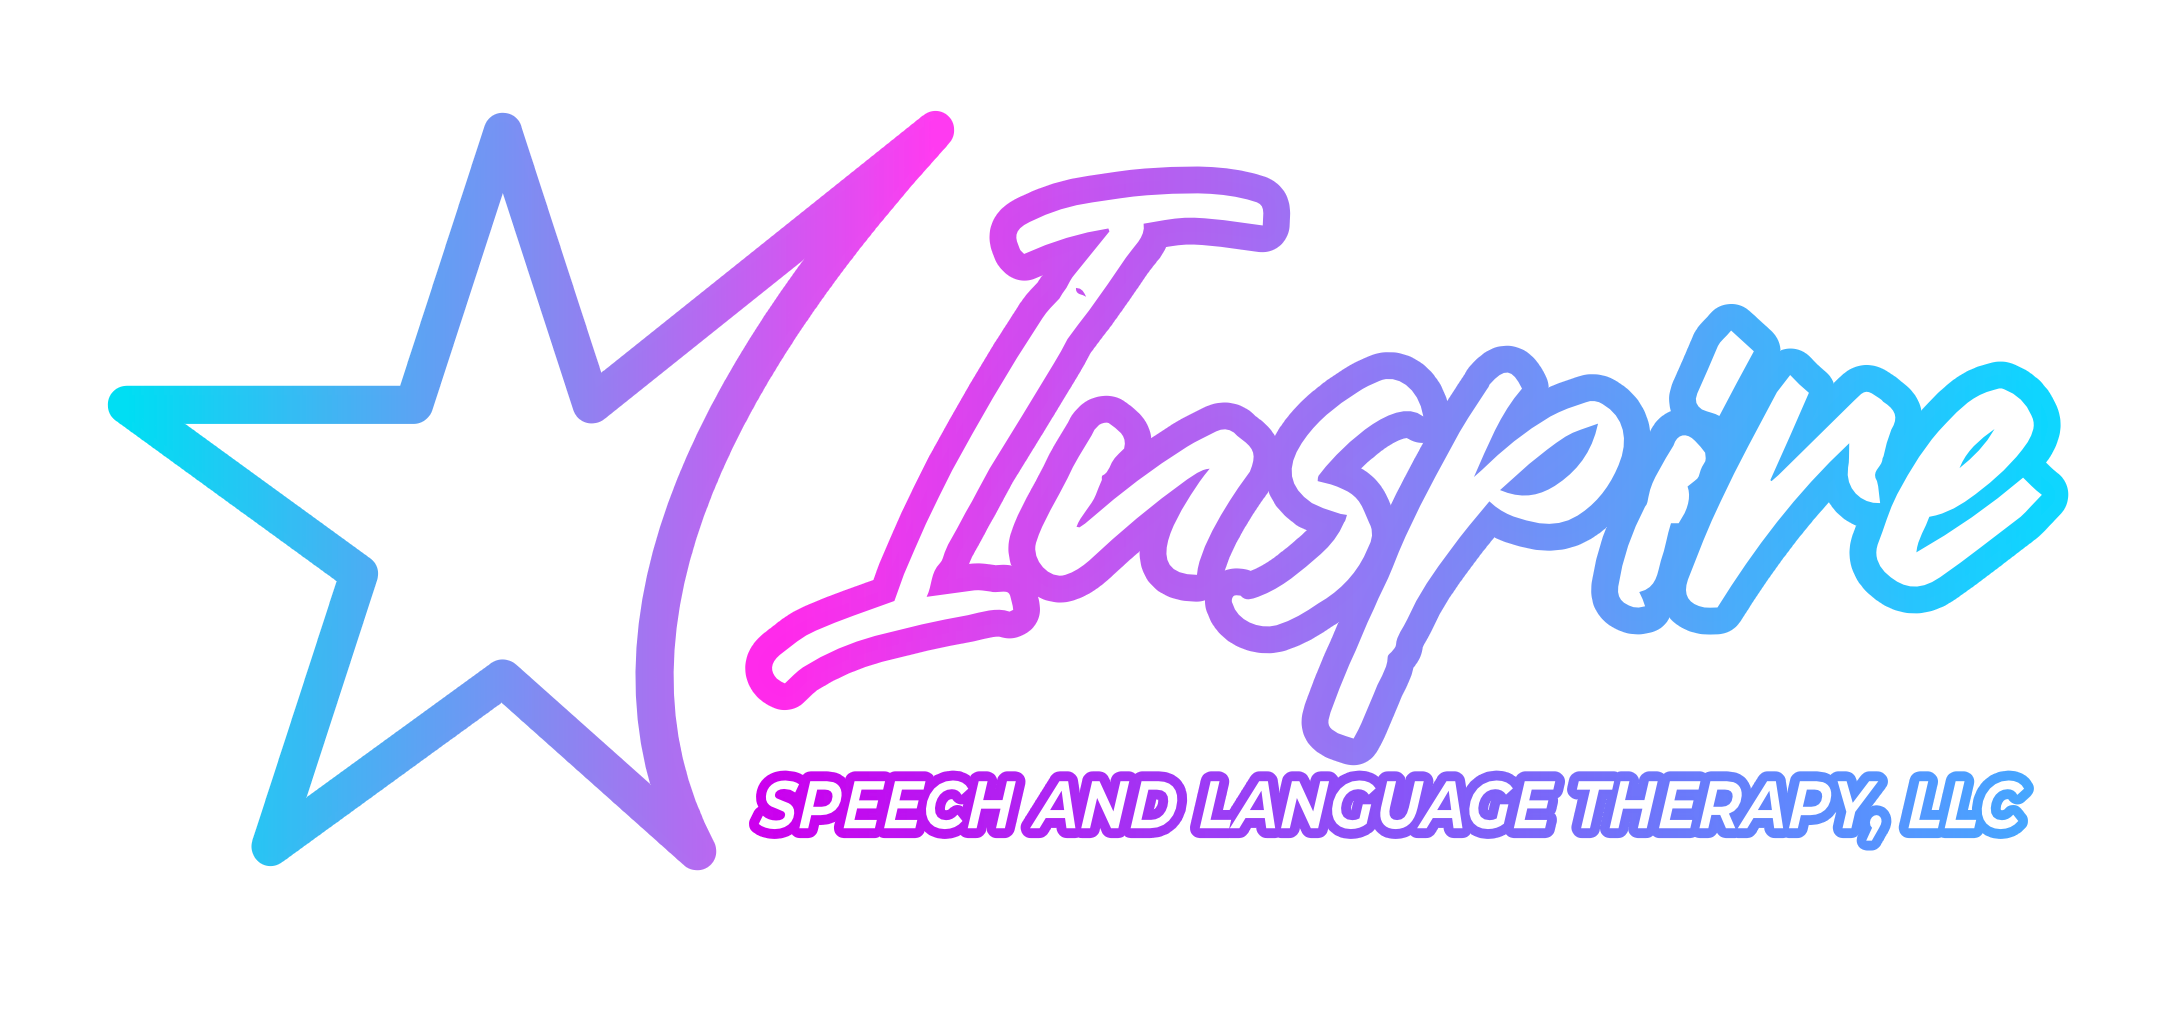 Inspire Speech and Language Therapy, LLC logo